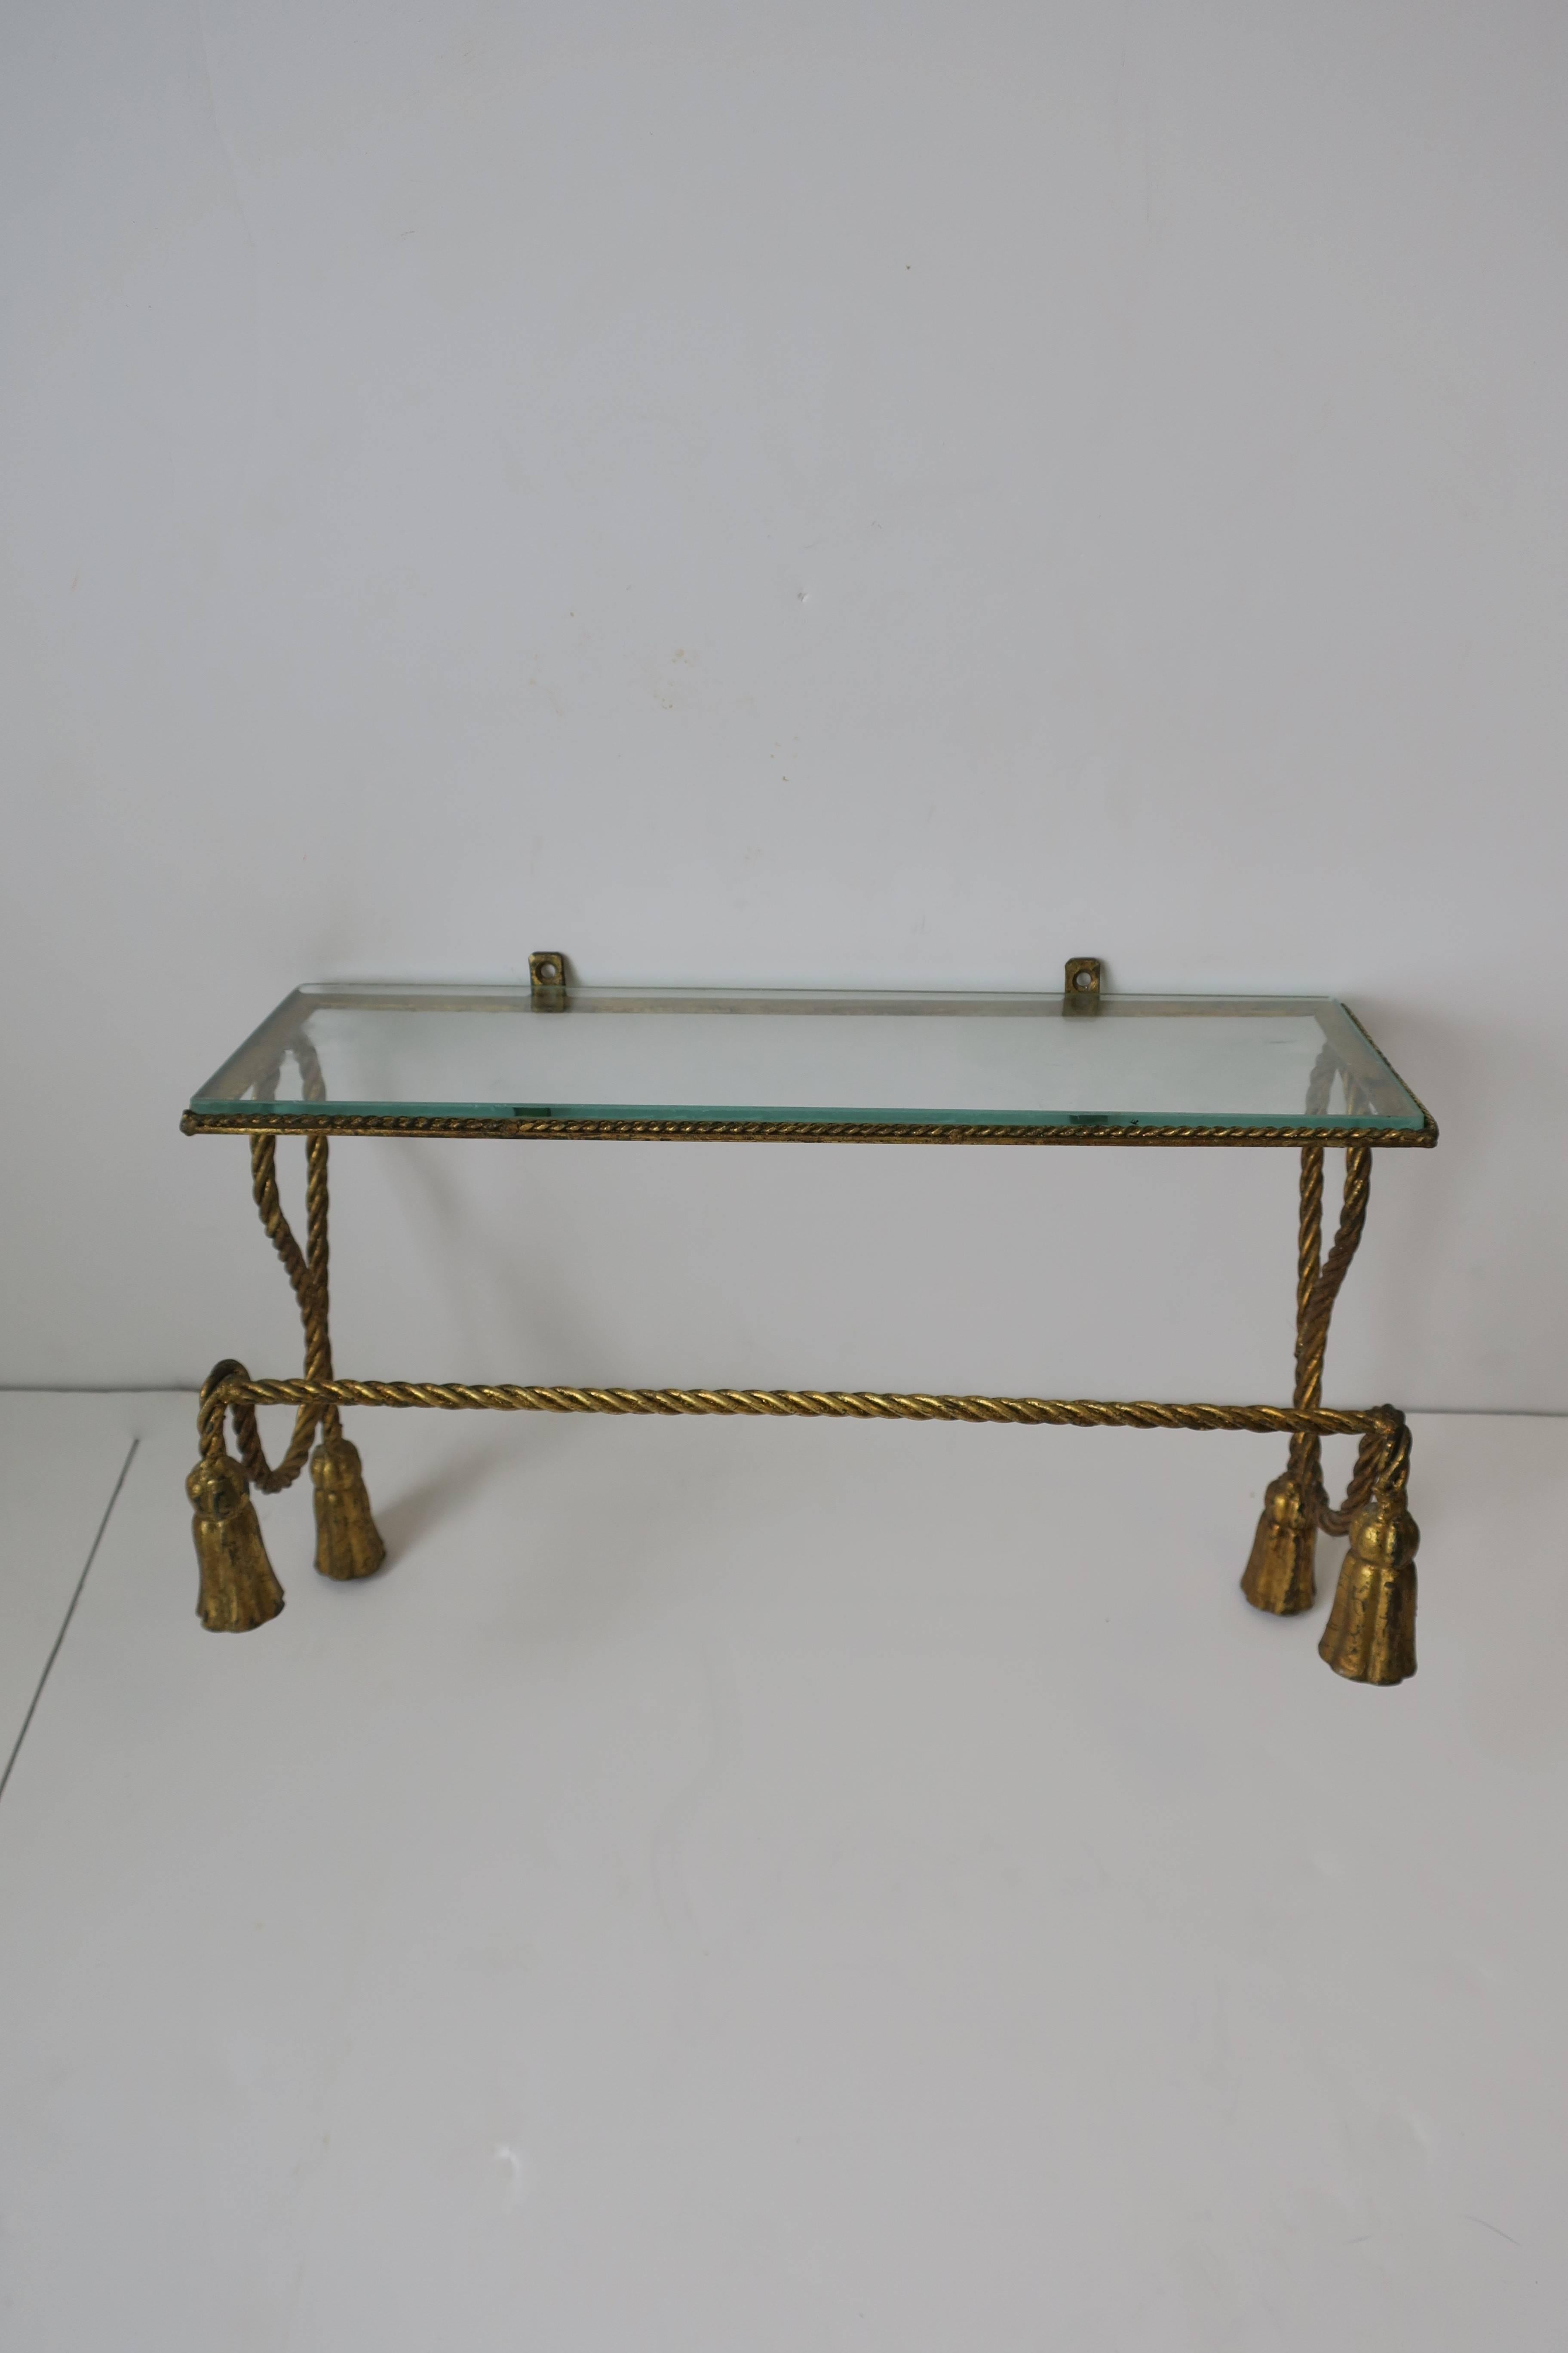 A beautiful Mid-Century Italian gold gilt tole metal and glass bathroom vanity wall shelf with decorative 'tassel' details at sides. Gold gilt tole metal frame with shelf also has a bar for face or hand towels.

Measurements include: 11.25 in. H x